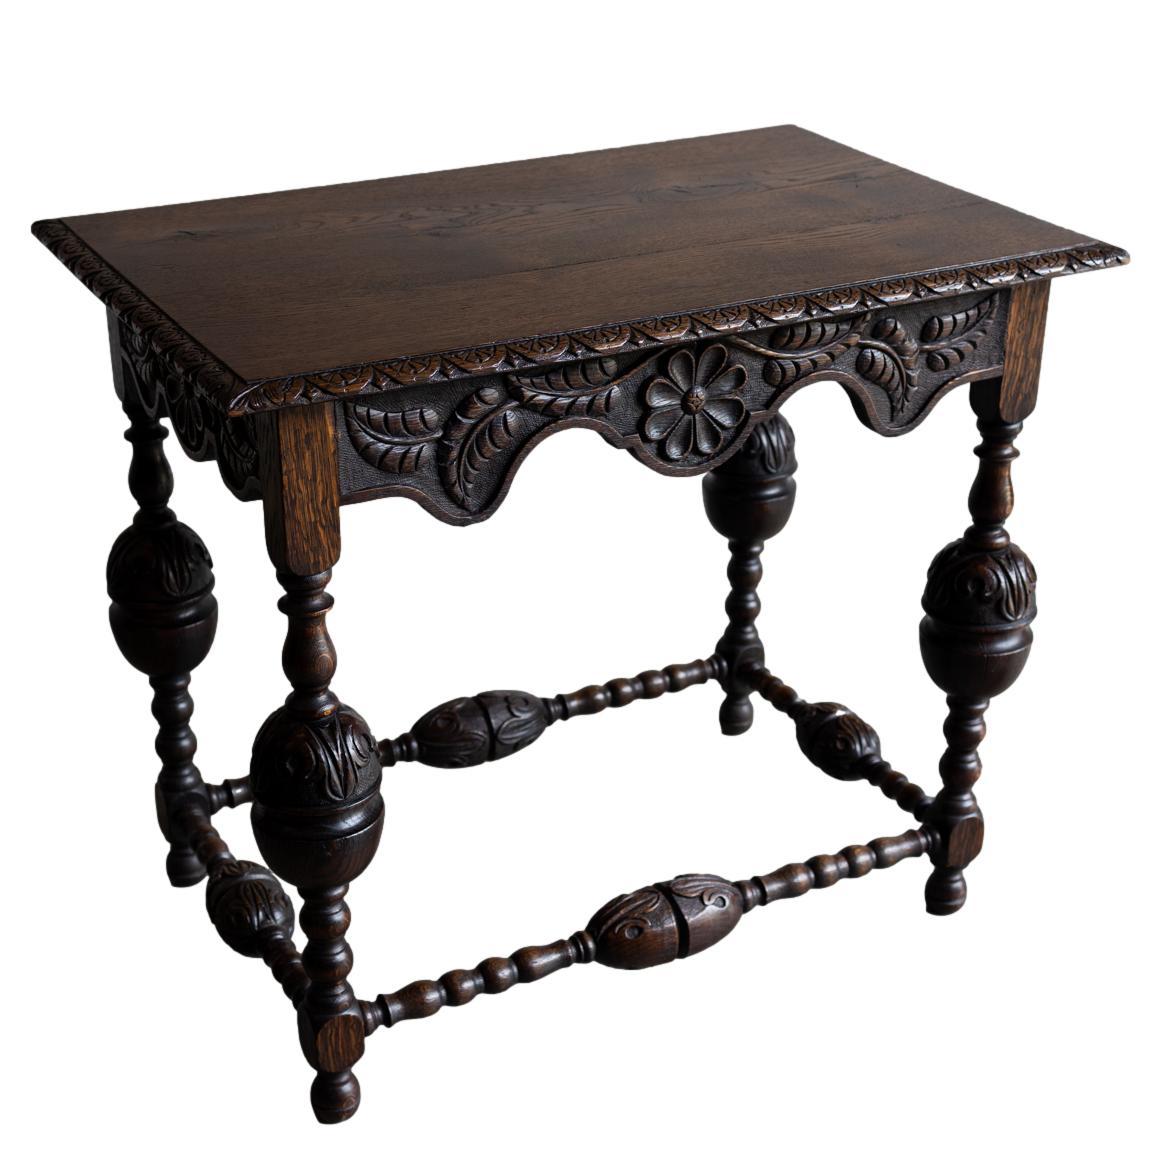 A Tudor-Style Carved Oak Center Table, the rectangular top with a floral fan and dart molded edge, above a shaped apron carved with a daisy medallion and carved leaves to all four sides, with foliate-carved cup-and-cover legs joined by stretchers